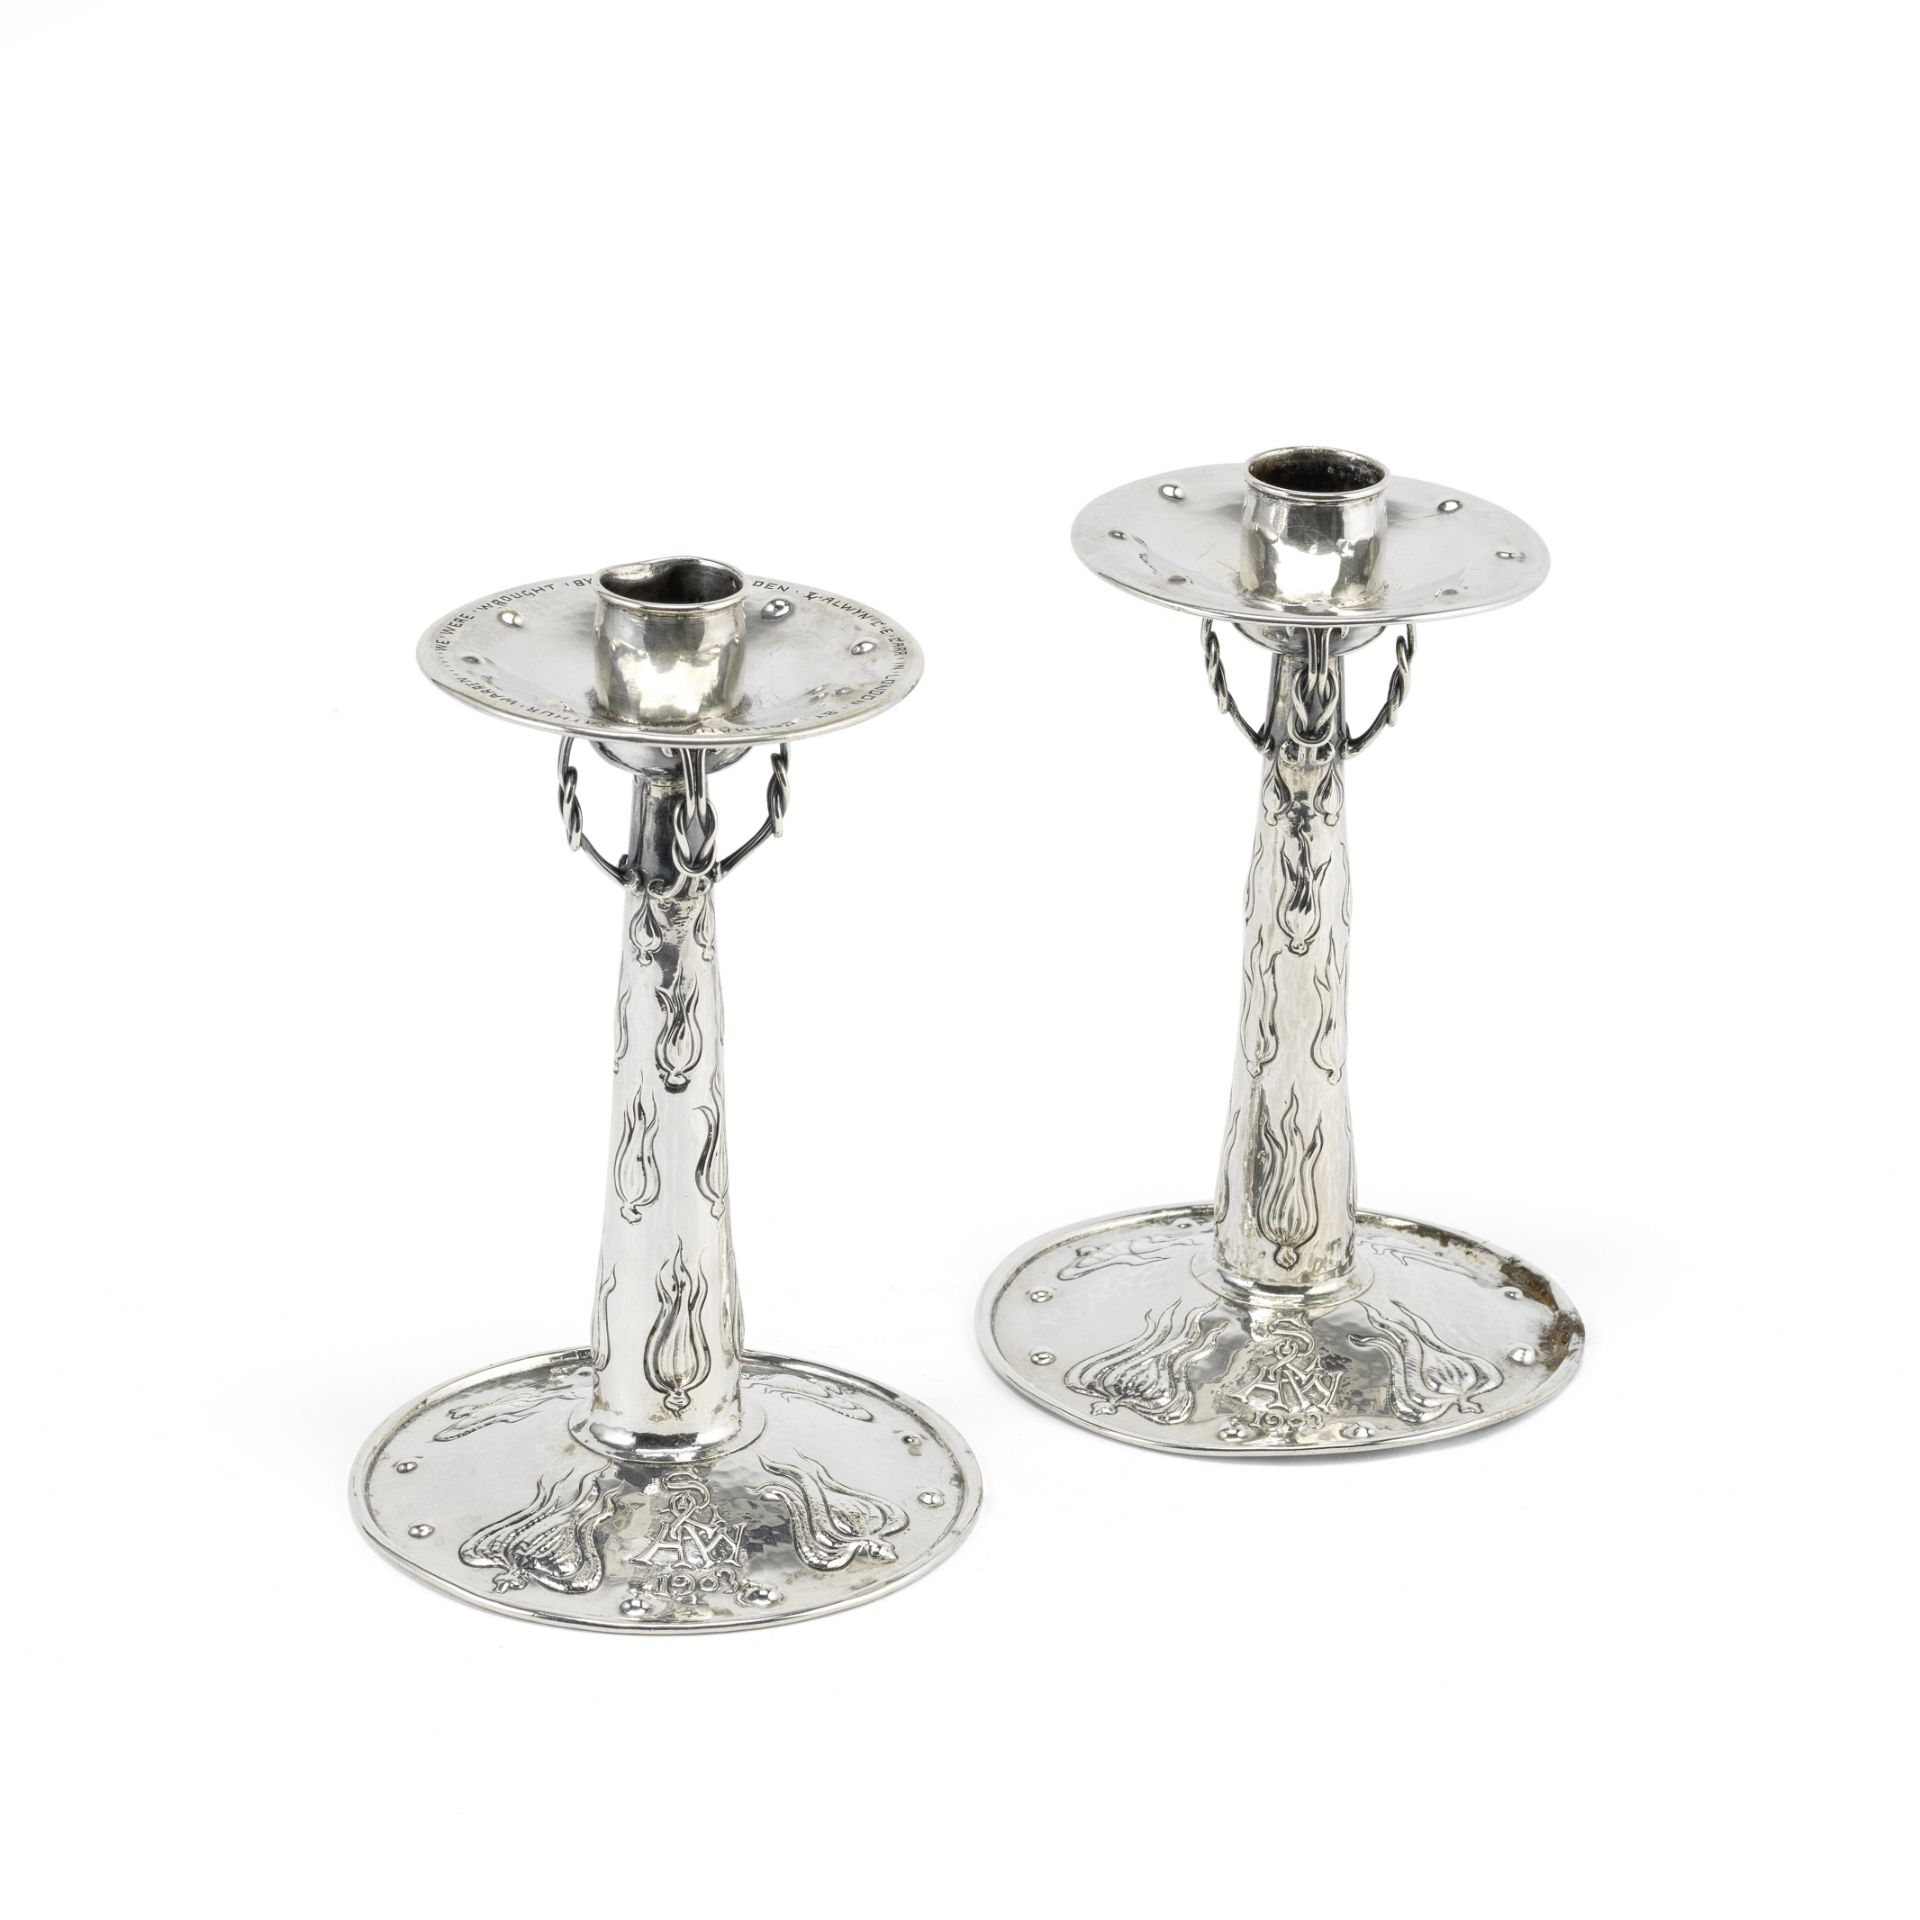 Omar Ramsden and Alwyn Carr: a pair of Arts and Crafts silver candlesticks London 1901 (2)